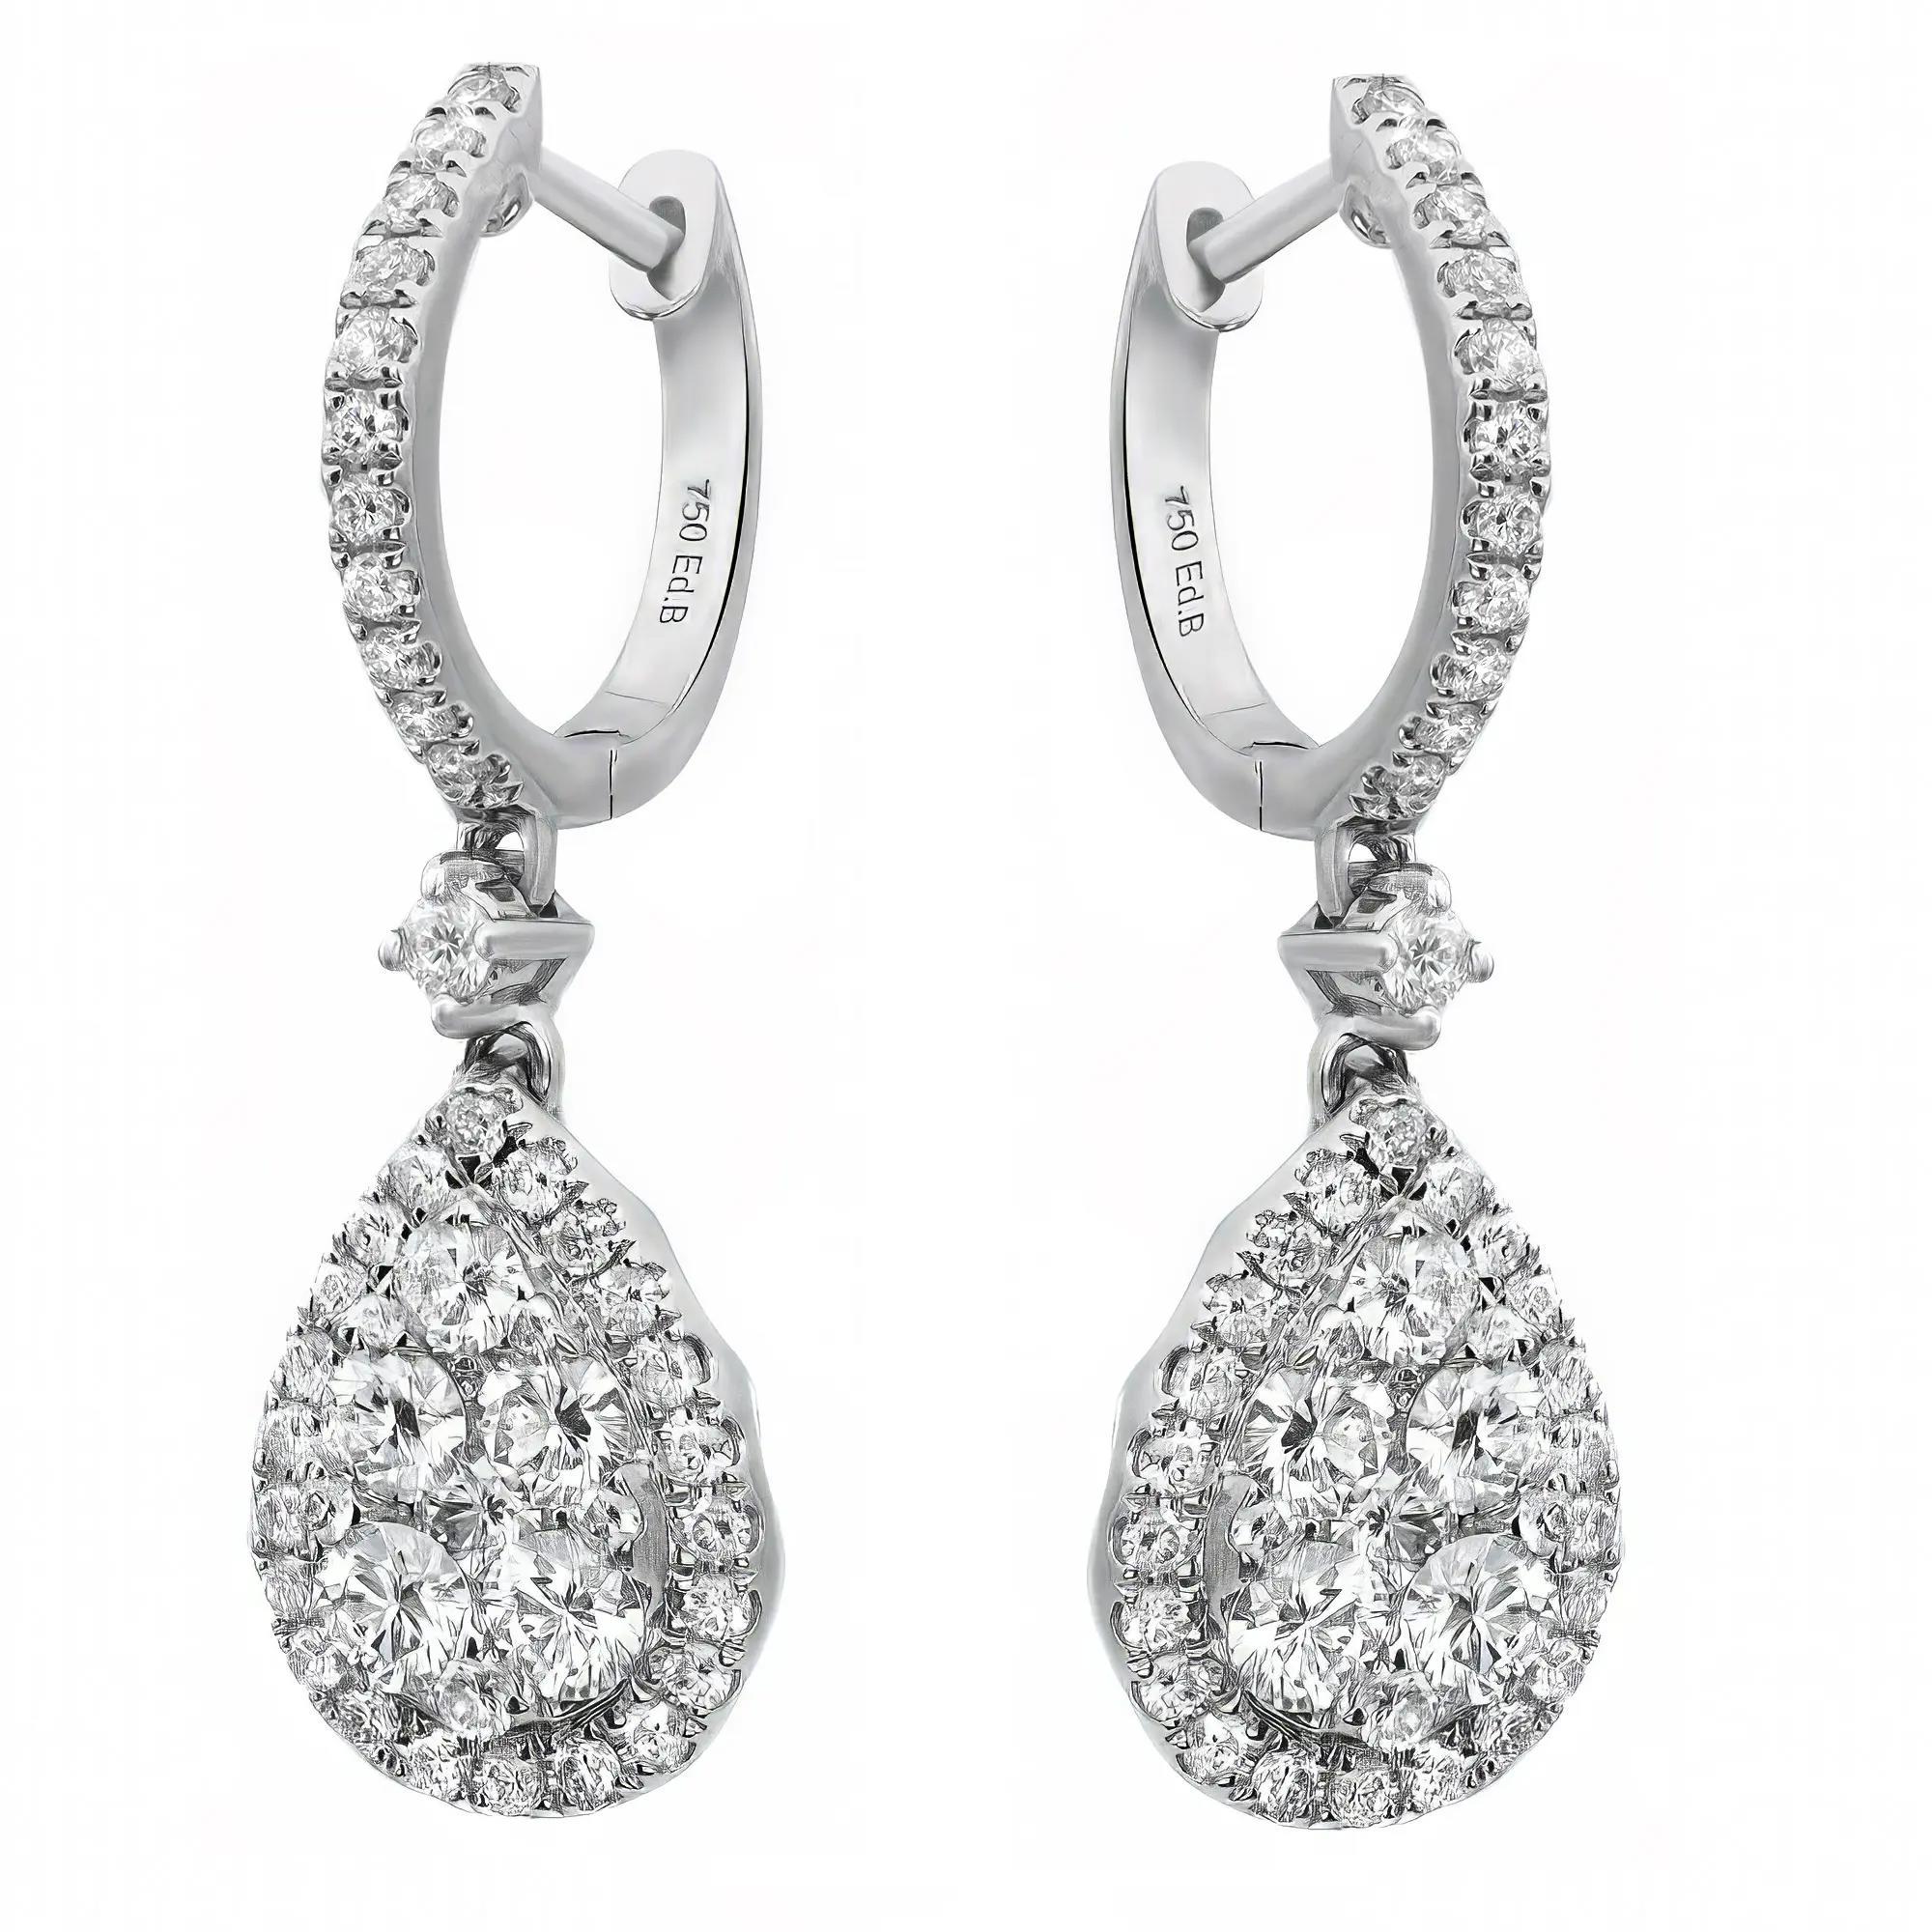 Chic and exquisite, diamond drop earrings crafted in lustrous 18K white gold. It features sparkling round brilliant cut diamonds set in a teardrop shape mounting in prong and invisible setting giving an illusion of a bigger size diamond that dangles